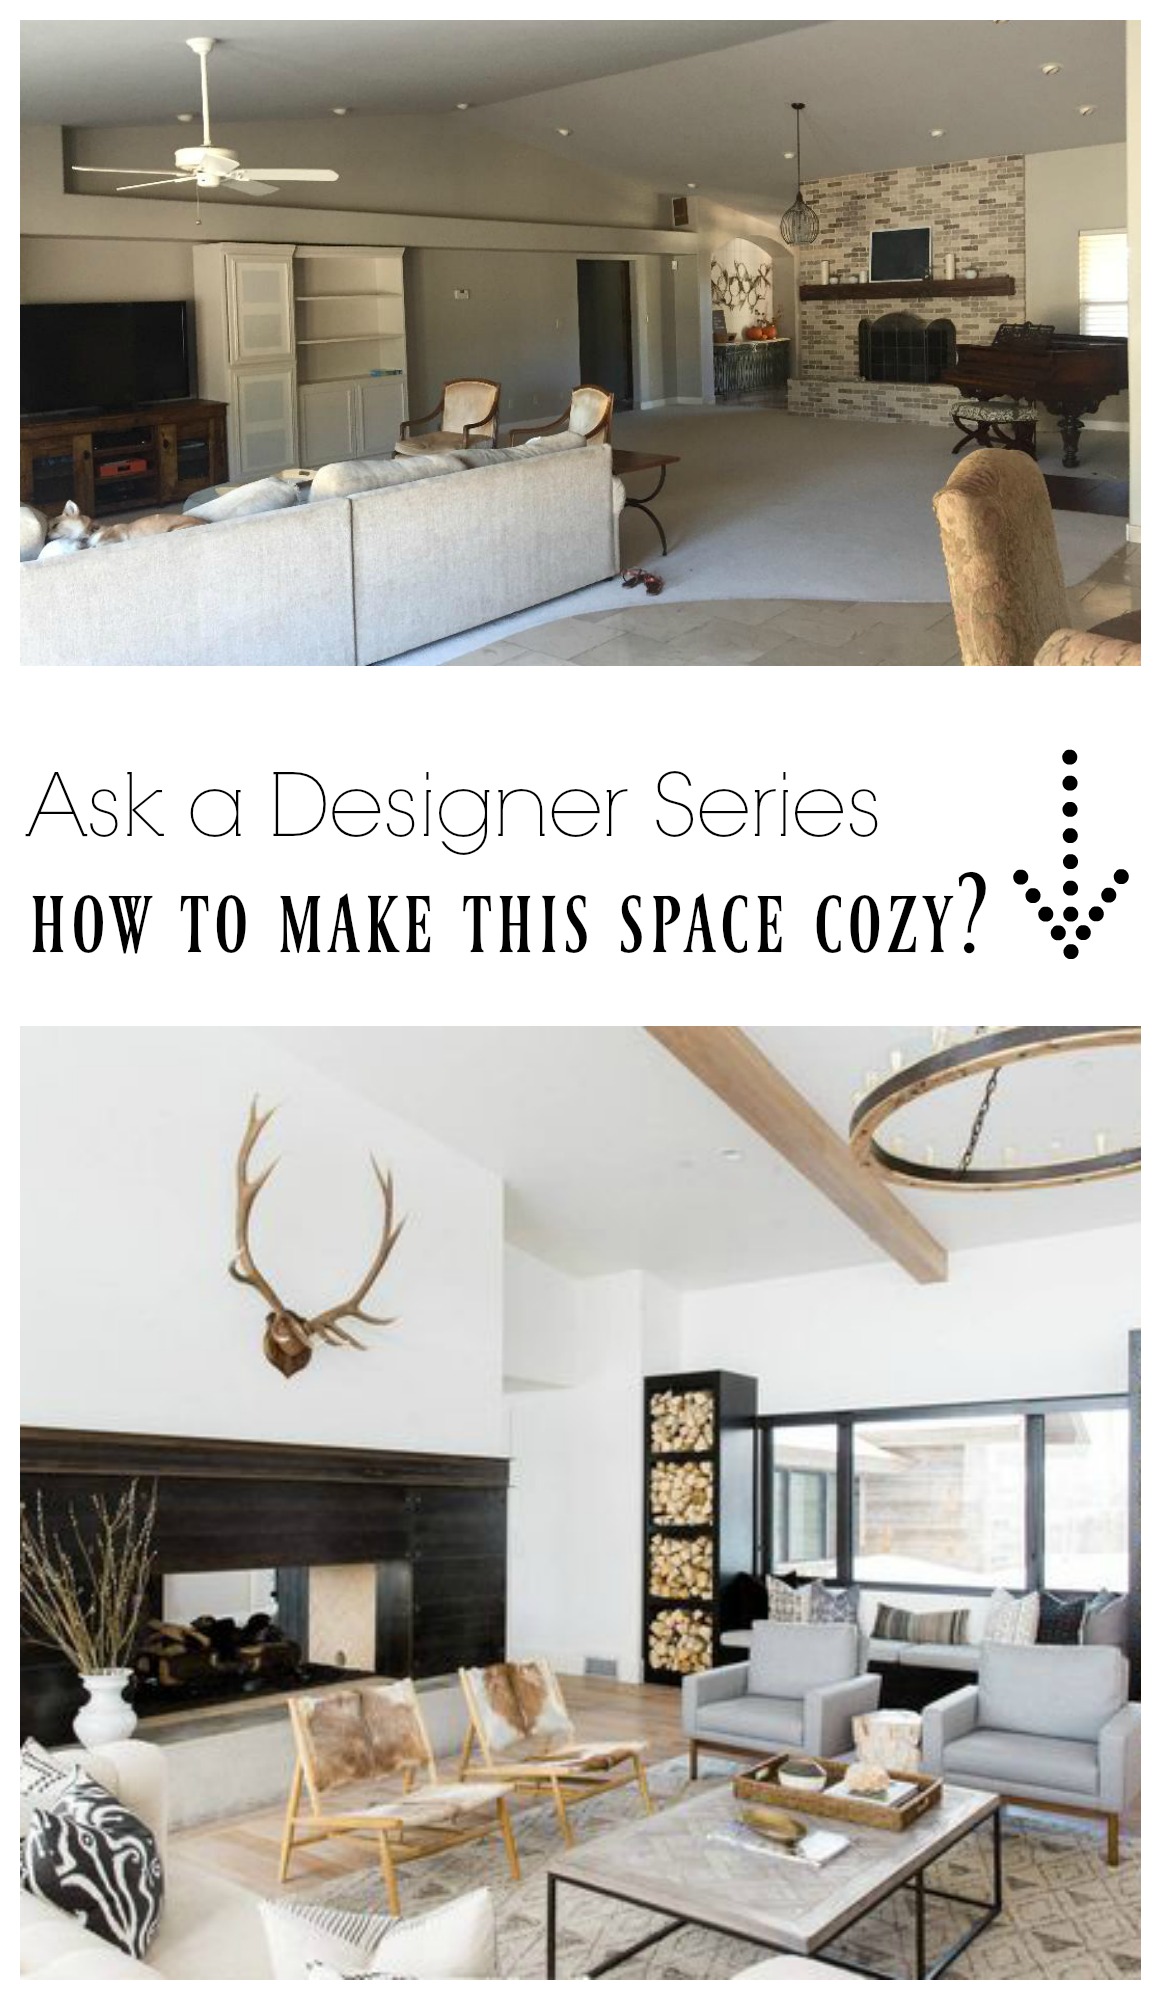 Ask a Designer Series- How do I make this Large open space cozy?